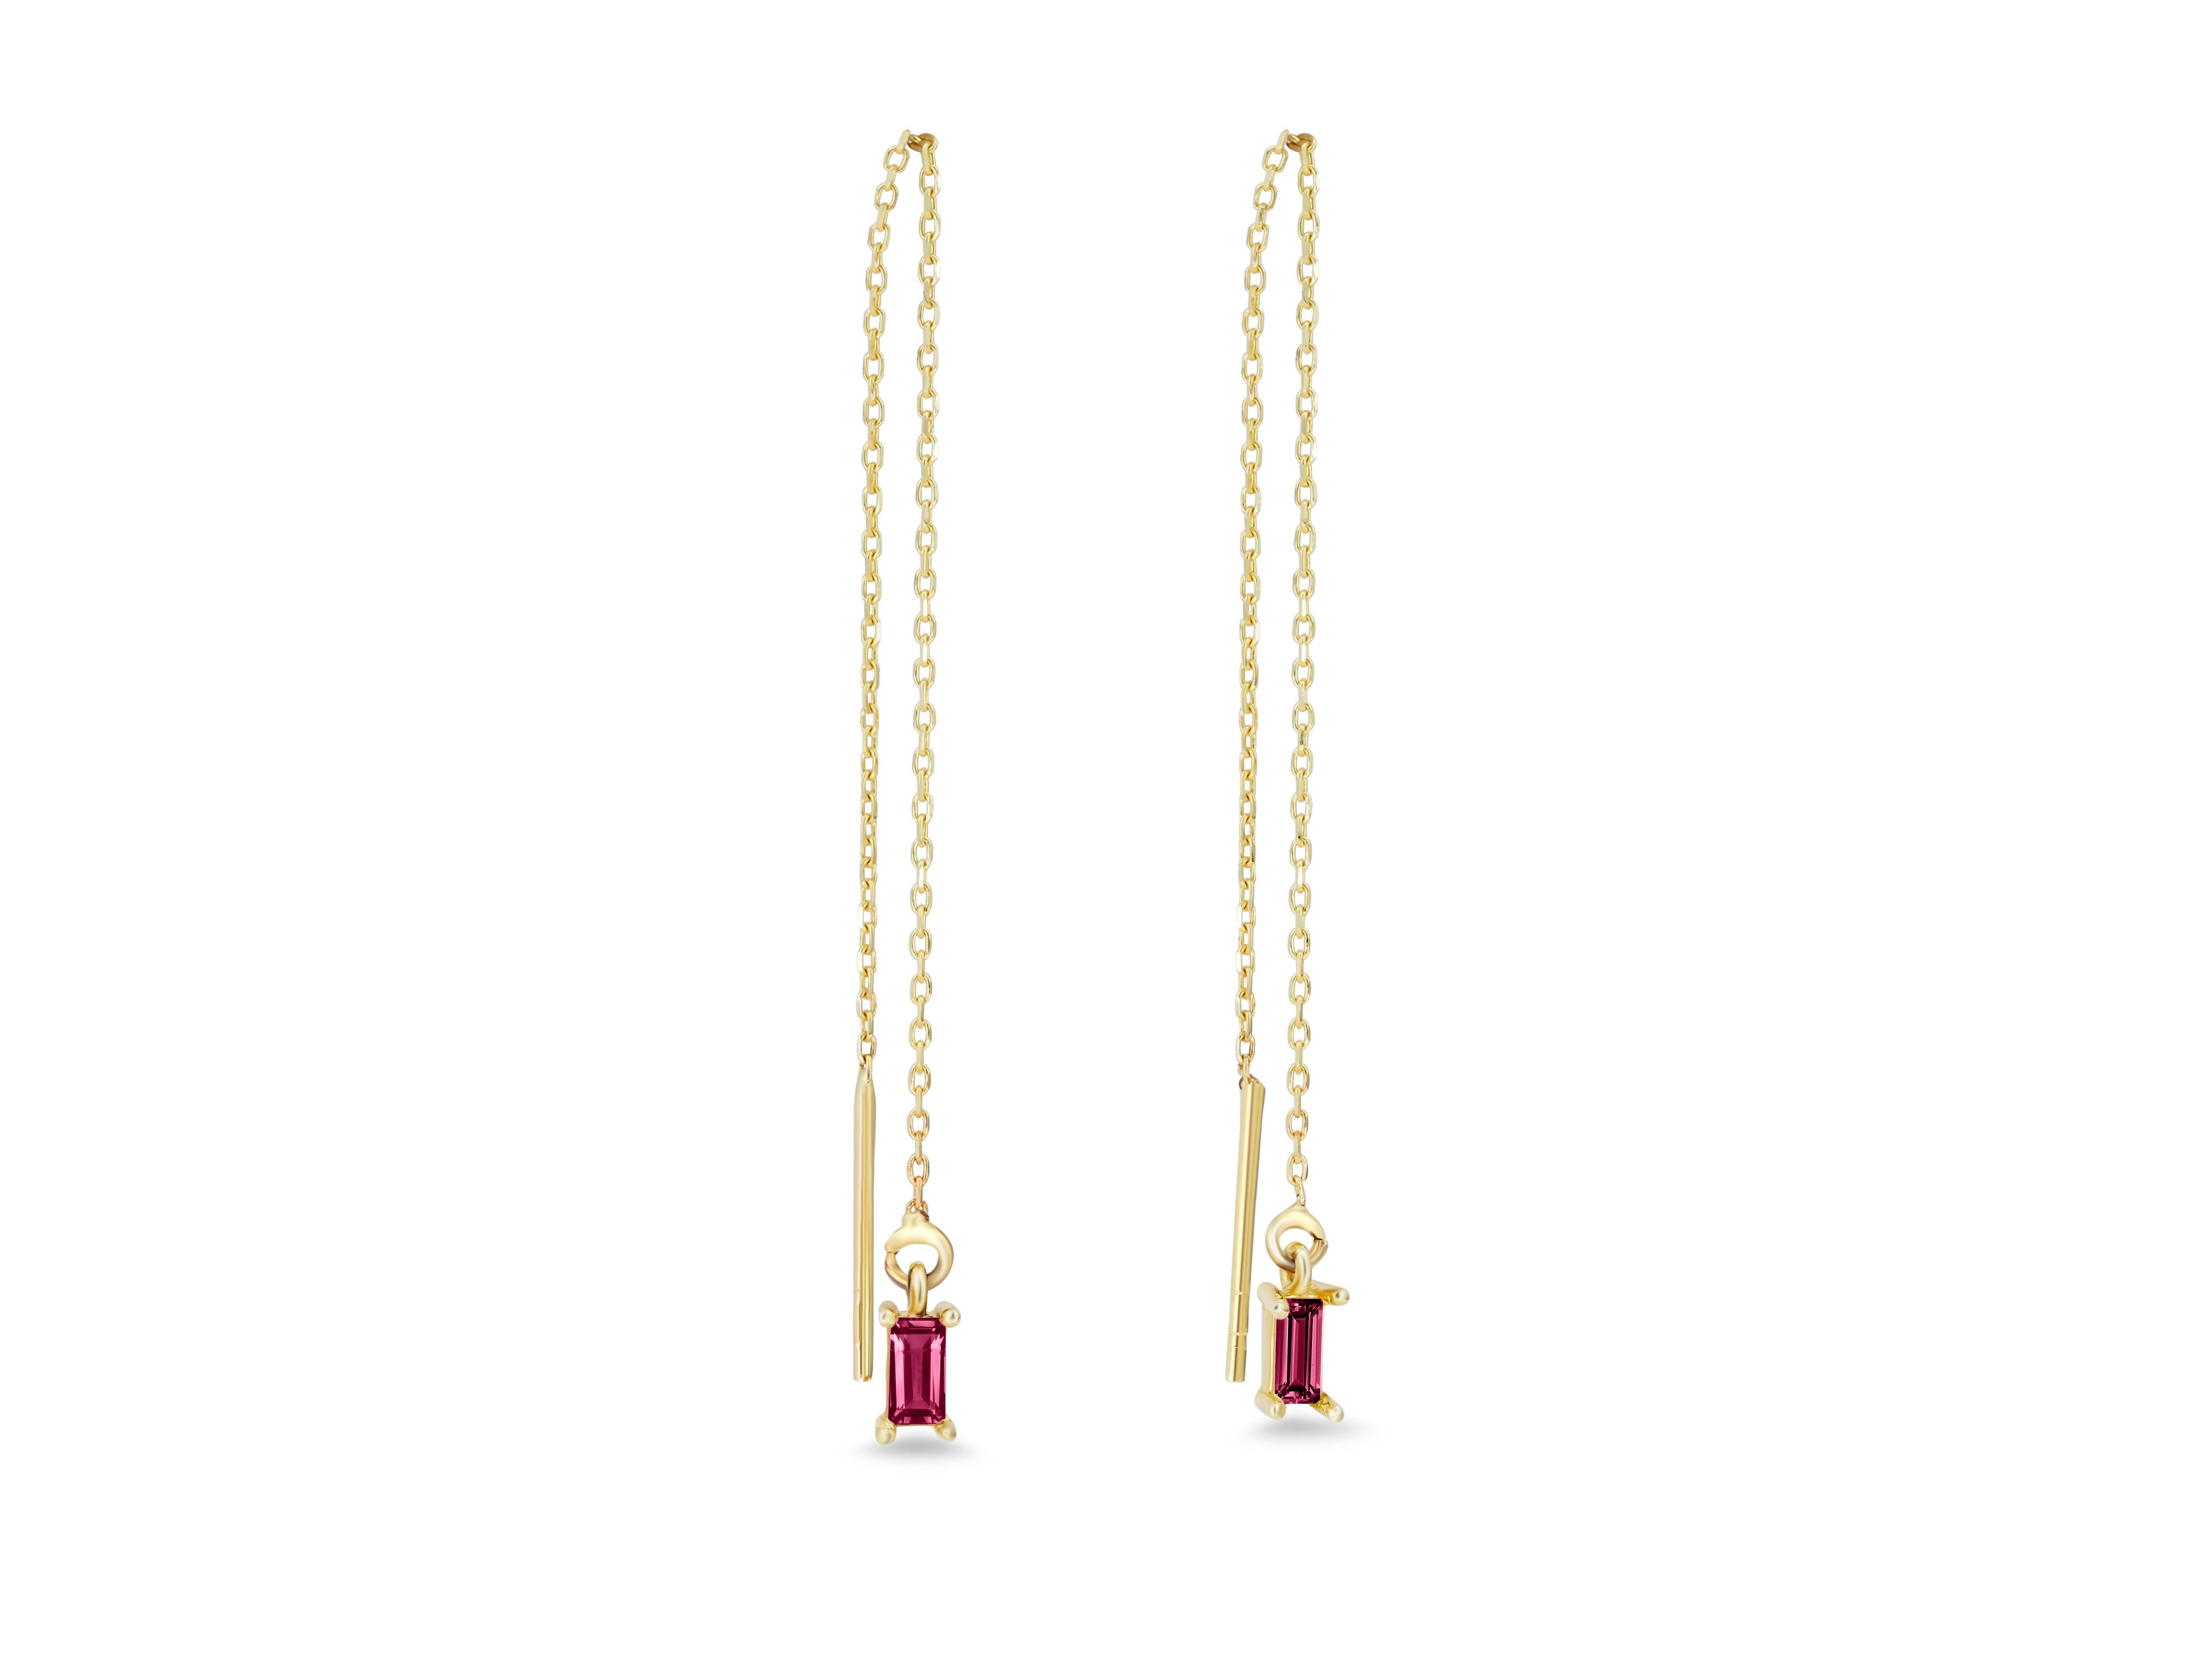  14k solid gold drop earrings with garnets.  Natural garnet solid gold earrings. Chain earrings.Baguette Earrings Dangle. Delicate Solid Gold chain Earrings.  14K Solid Gold Threader Chain Earrings

Metal: 14 karat yellow gold
Weight: 0.8-0.9